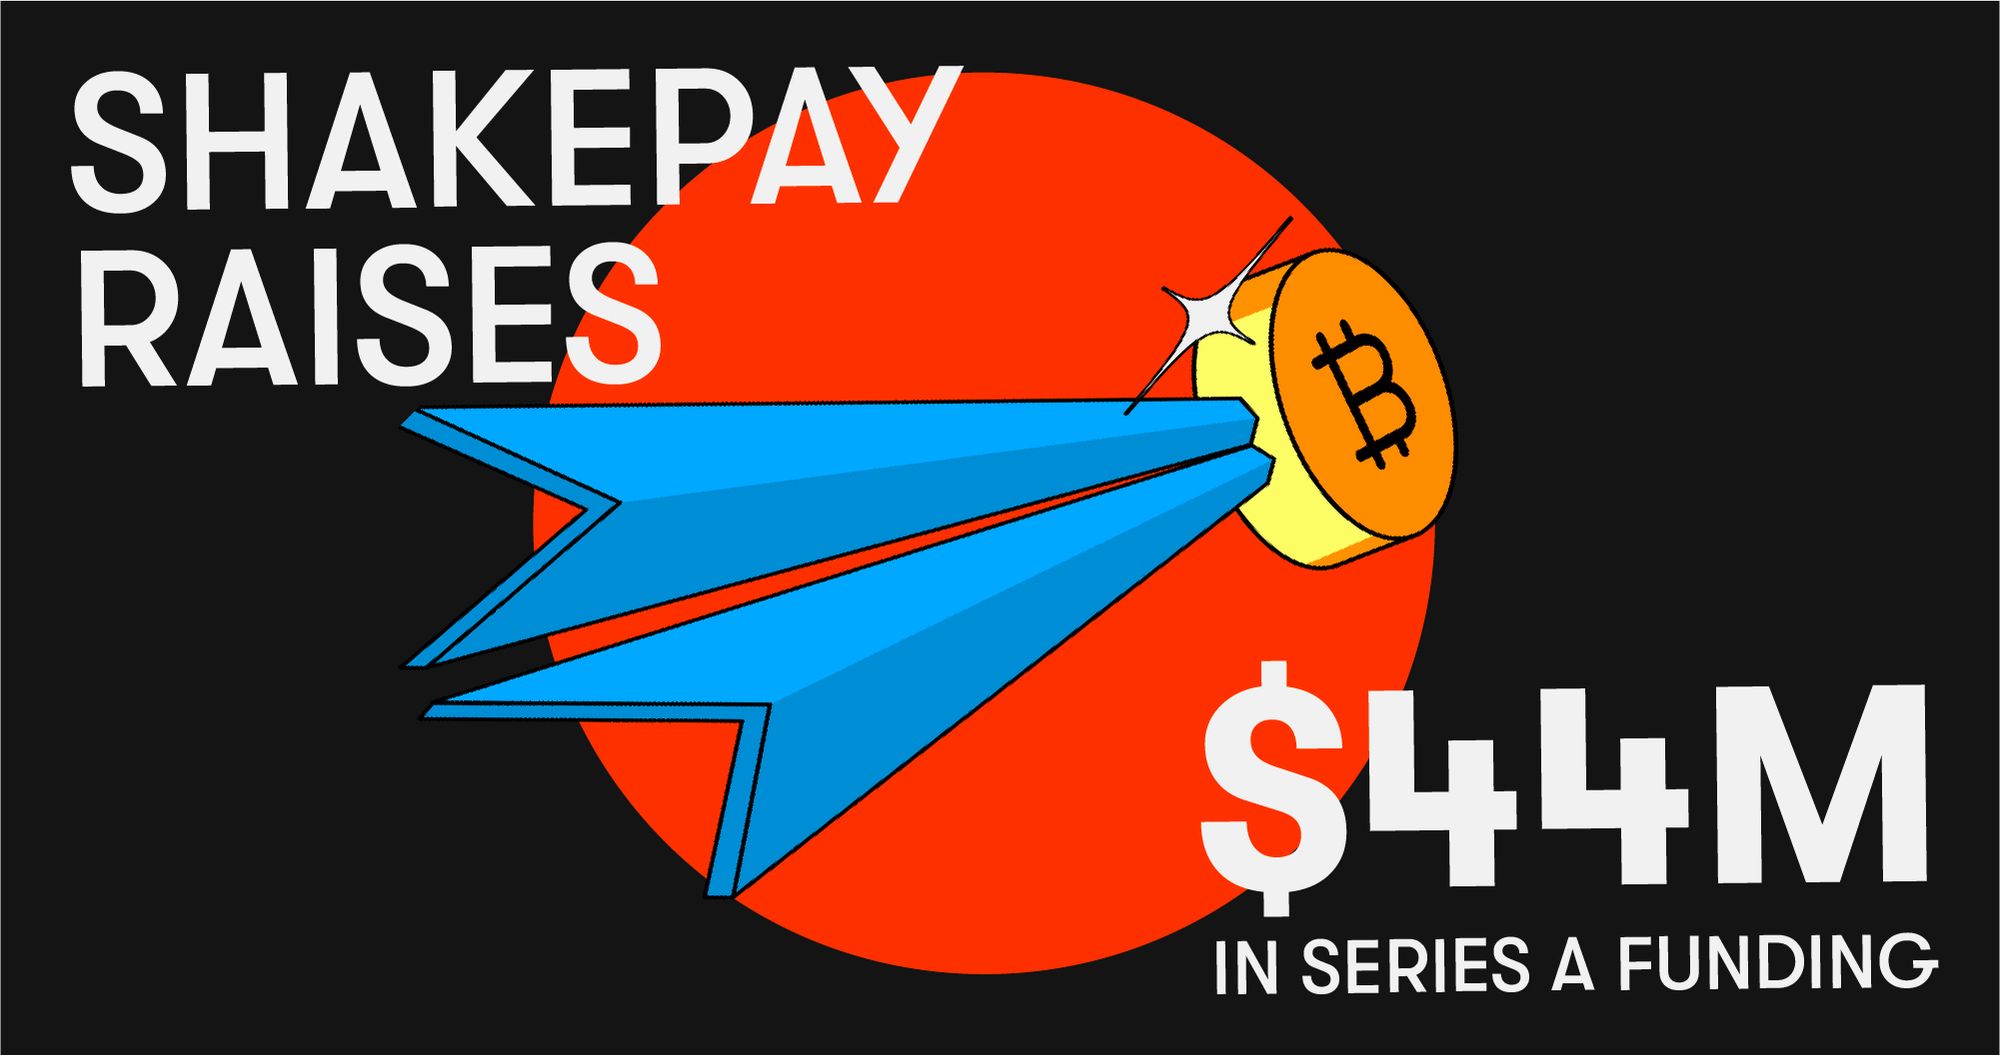 Shakepay raises $44m to usher in the Bitcoin Golden Age